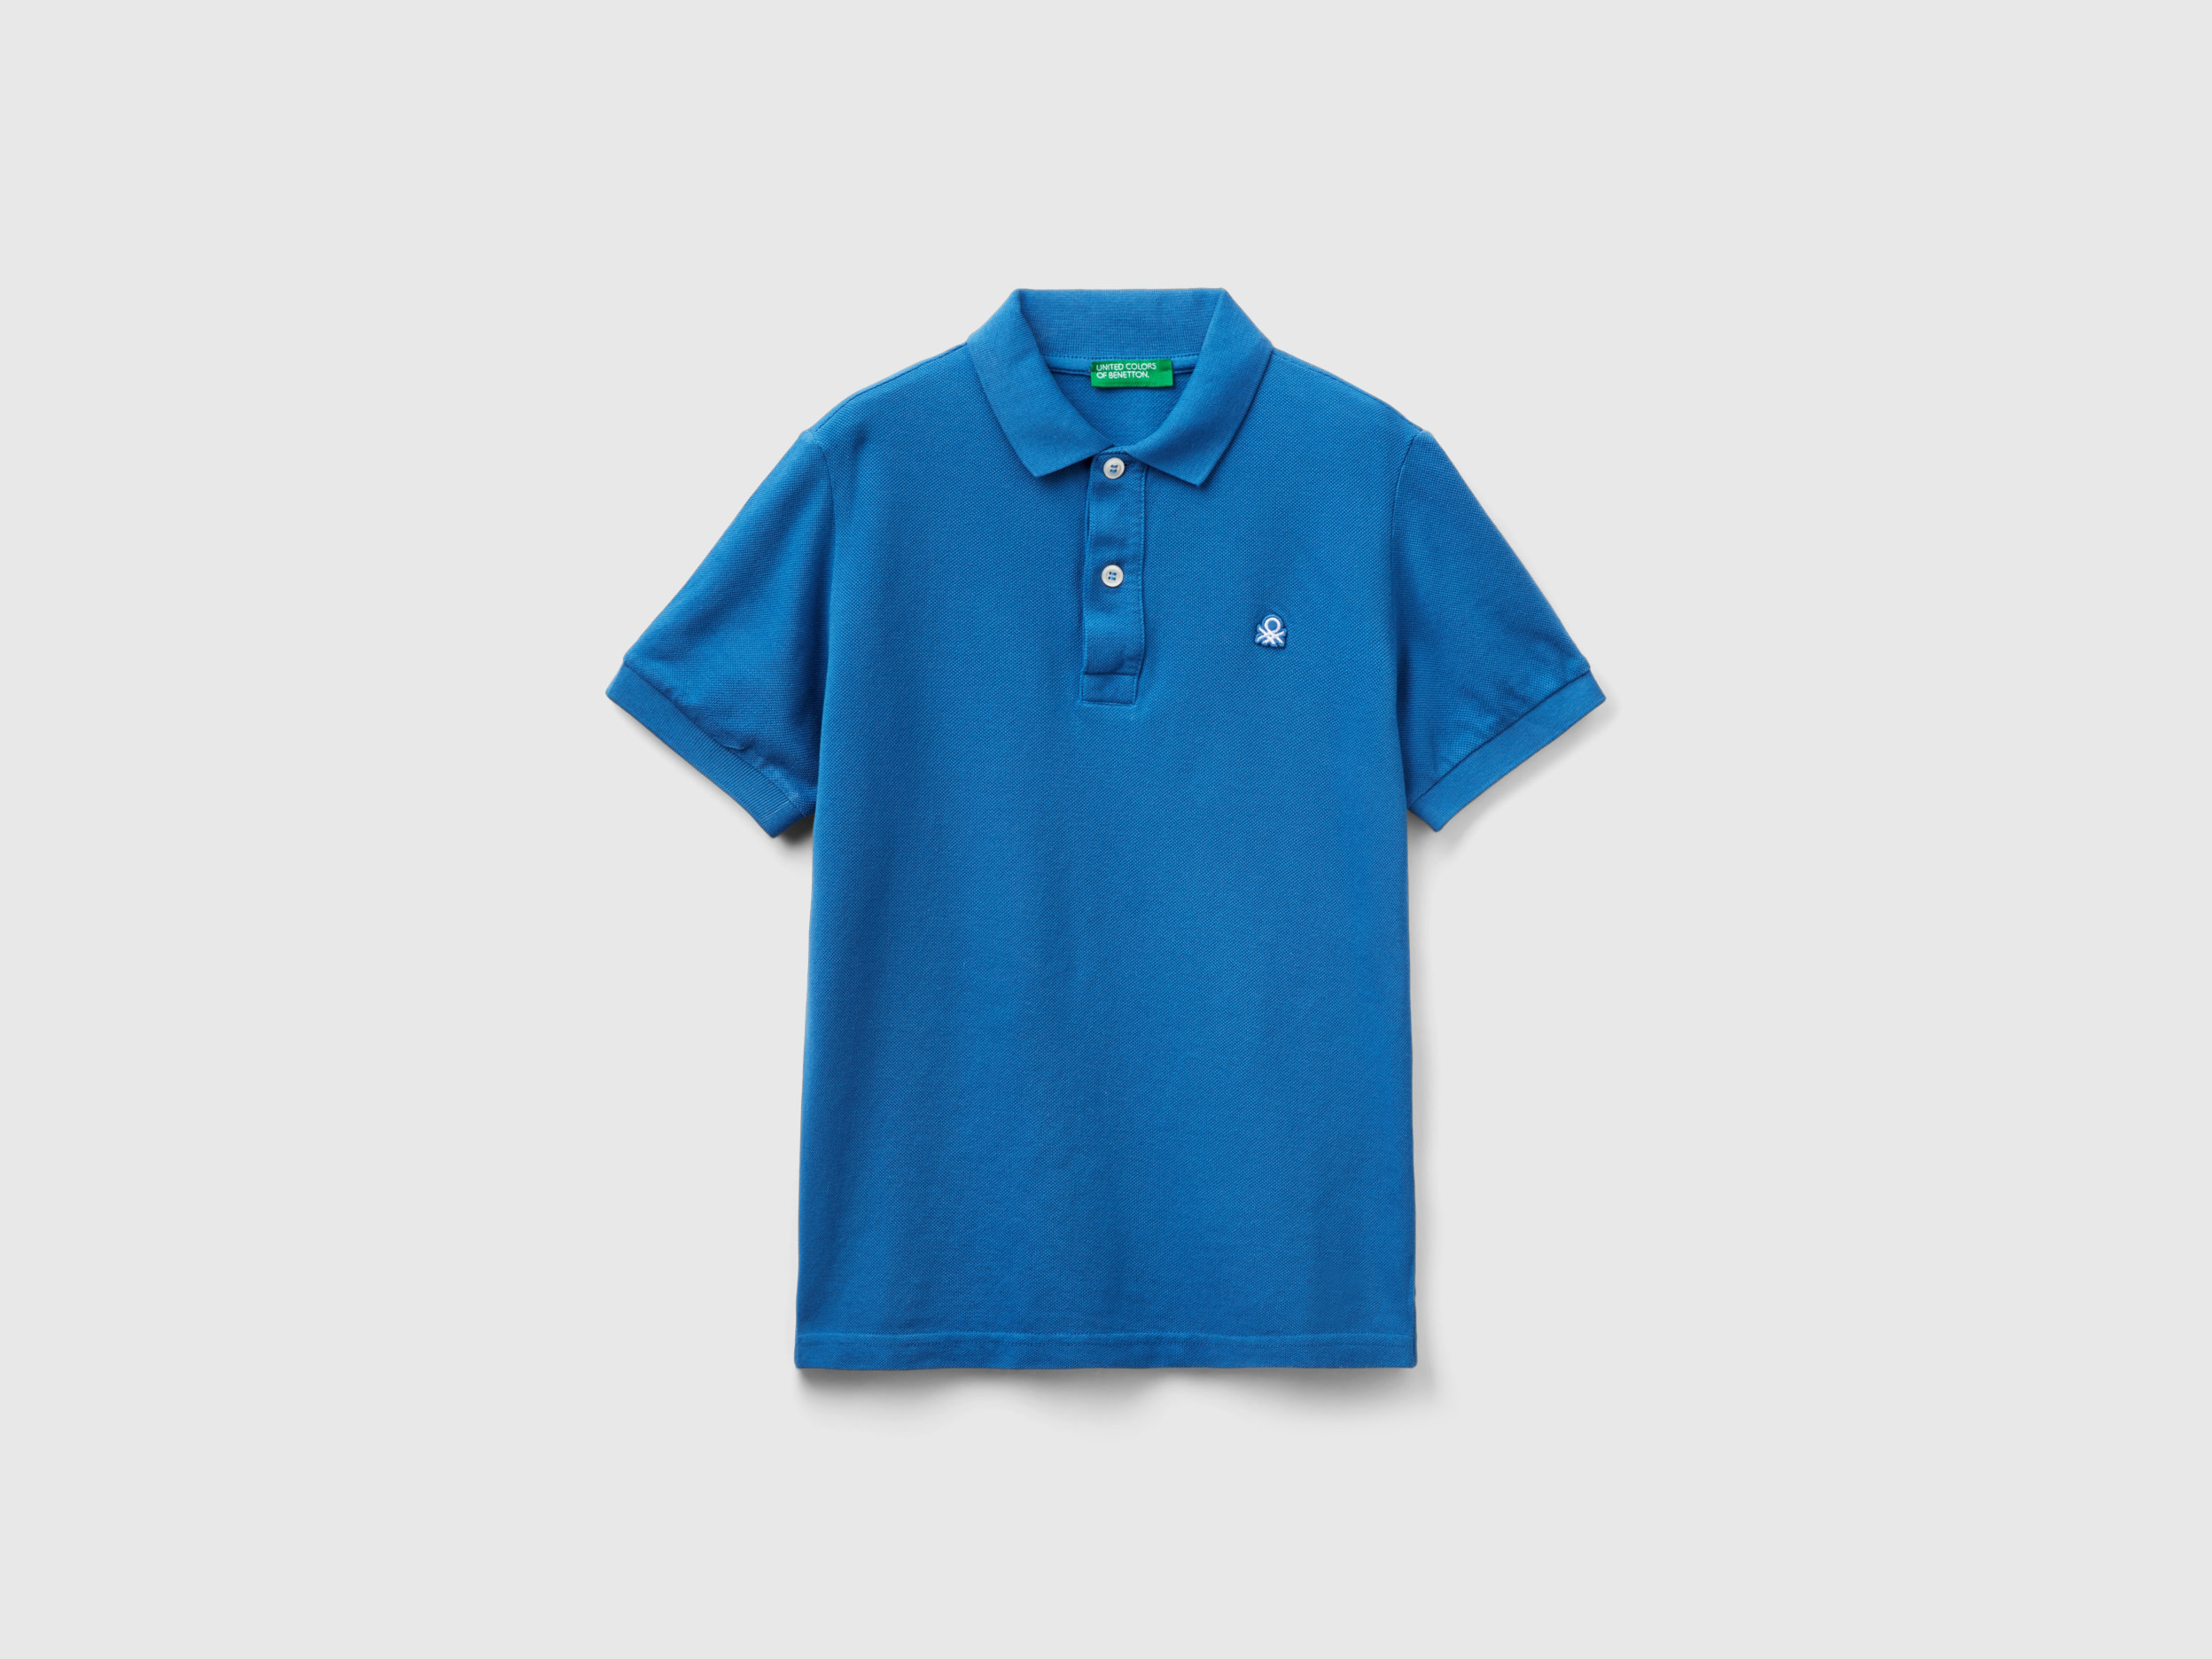 Image of Benetton, Slim Fit Polo In 100% Organic Cotton, size 2XL, Blue, Kids